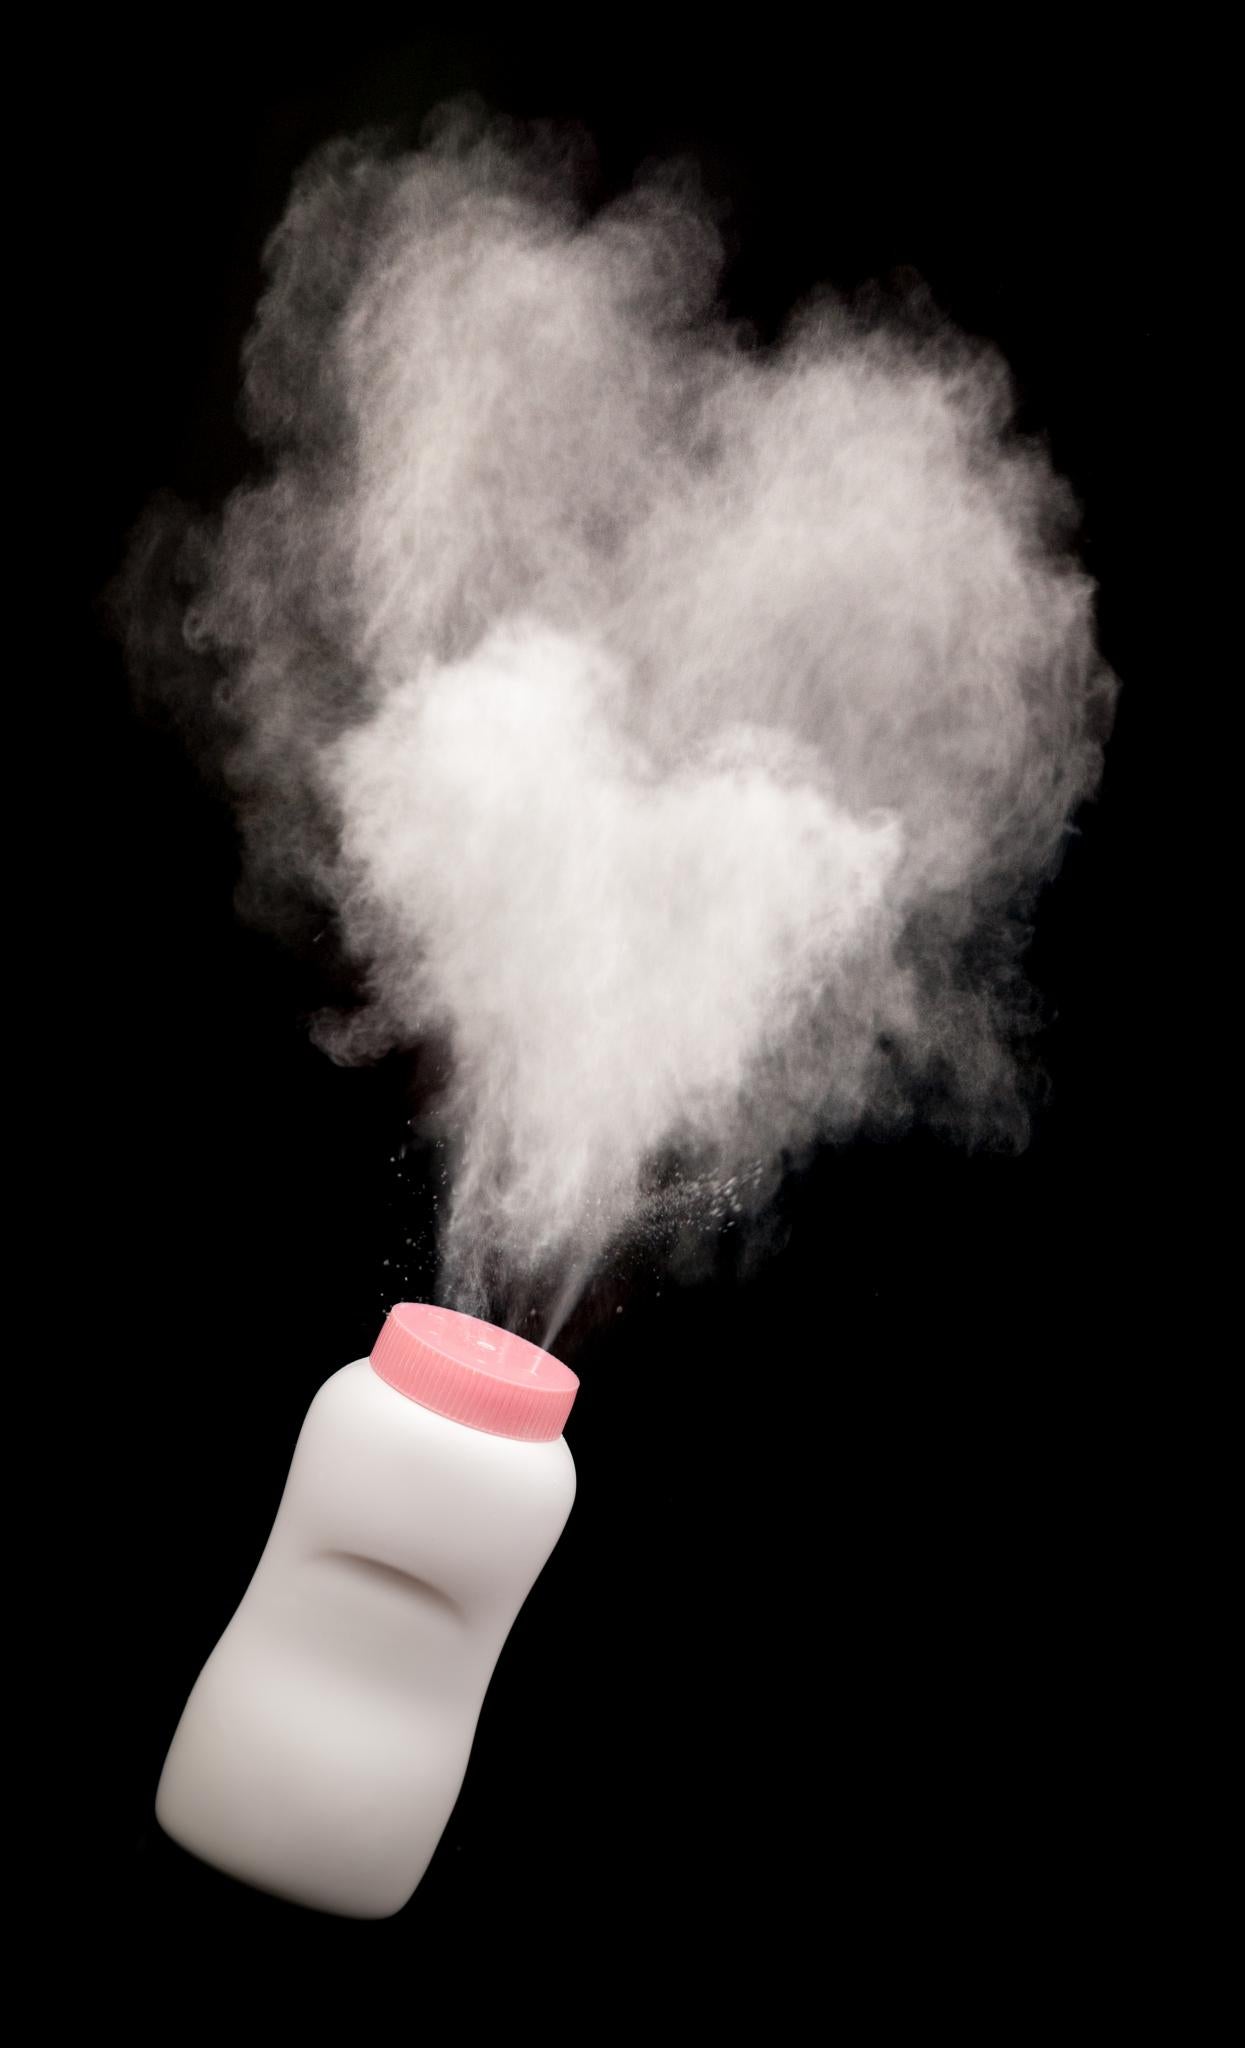 Yikes! Can Putting Baby Powder Down There Give You Cancer?